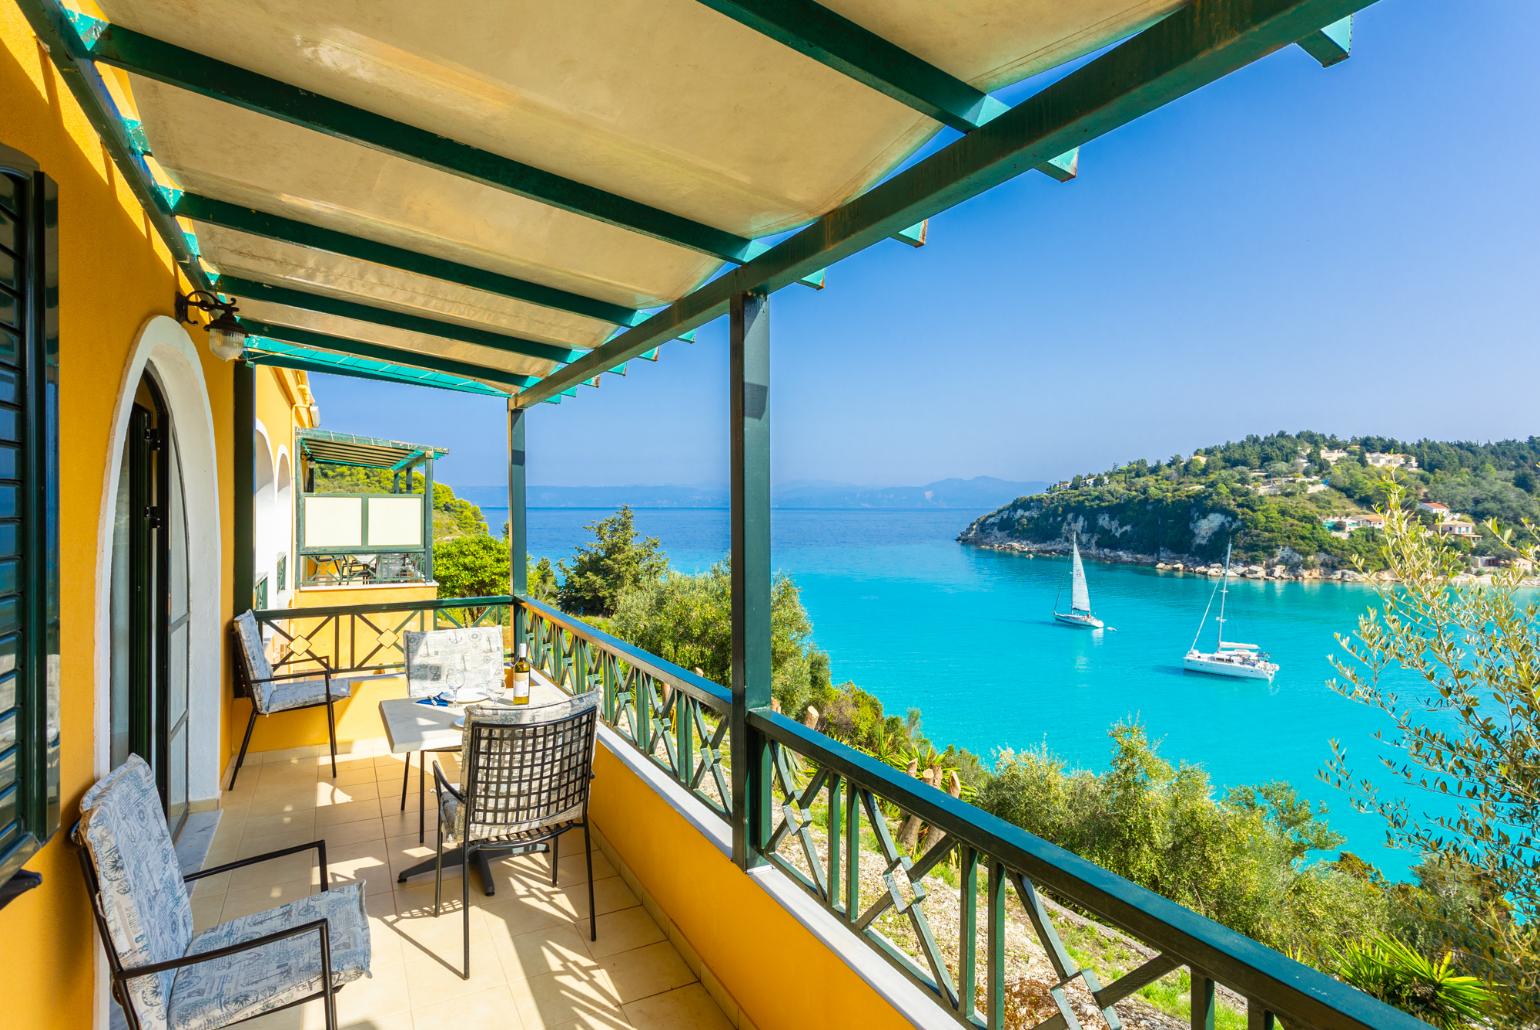 Private sheltered terrace area with panoramic sea views